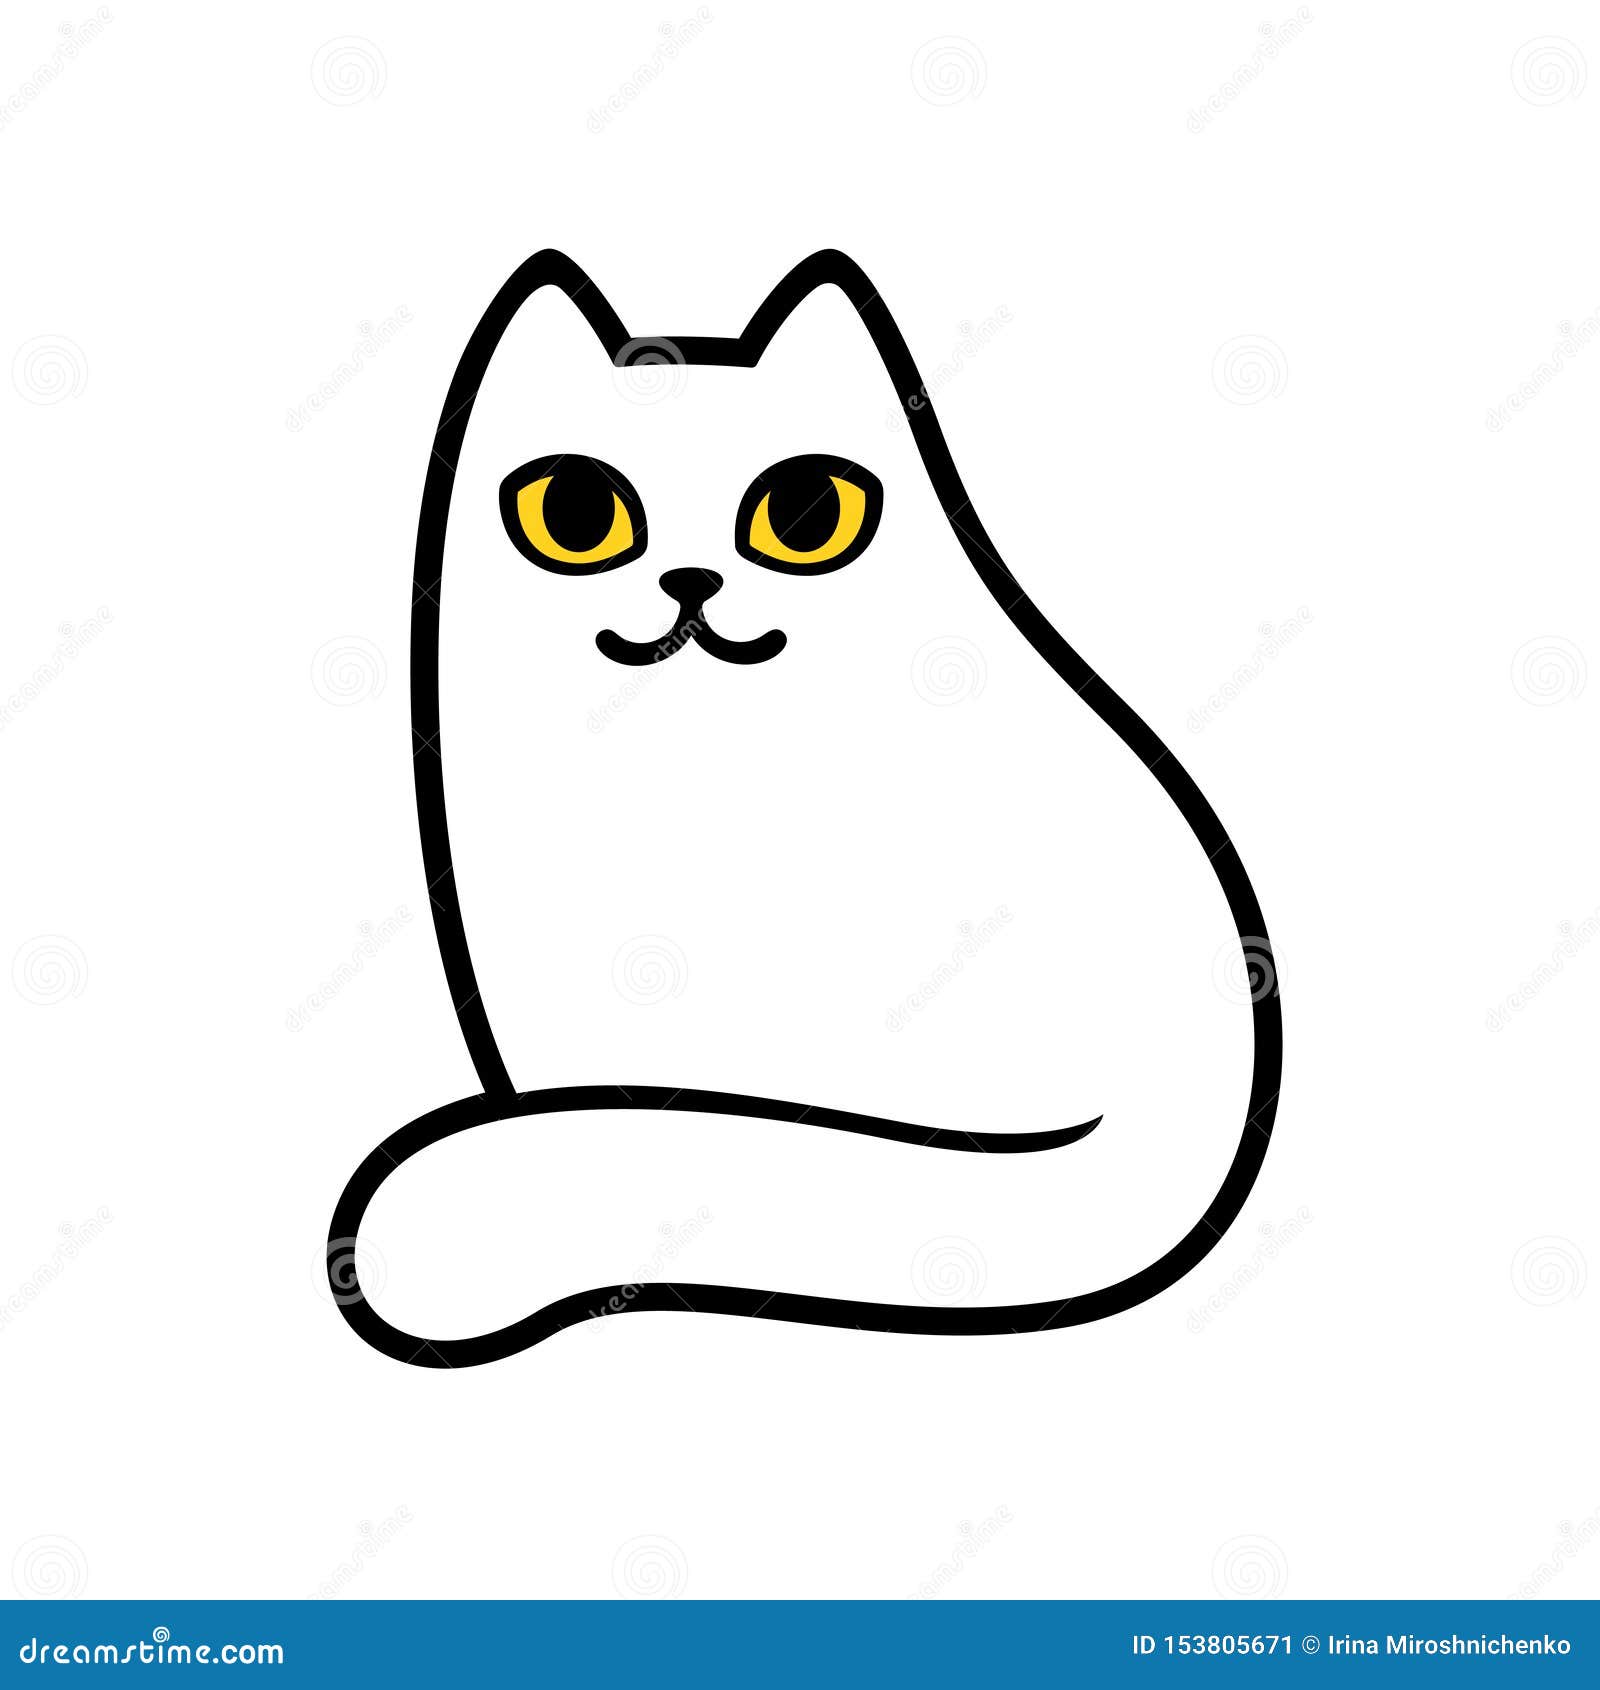 Cartoon white cat drawing stock vector. Illustration of clipart - 153805671